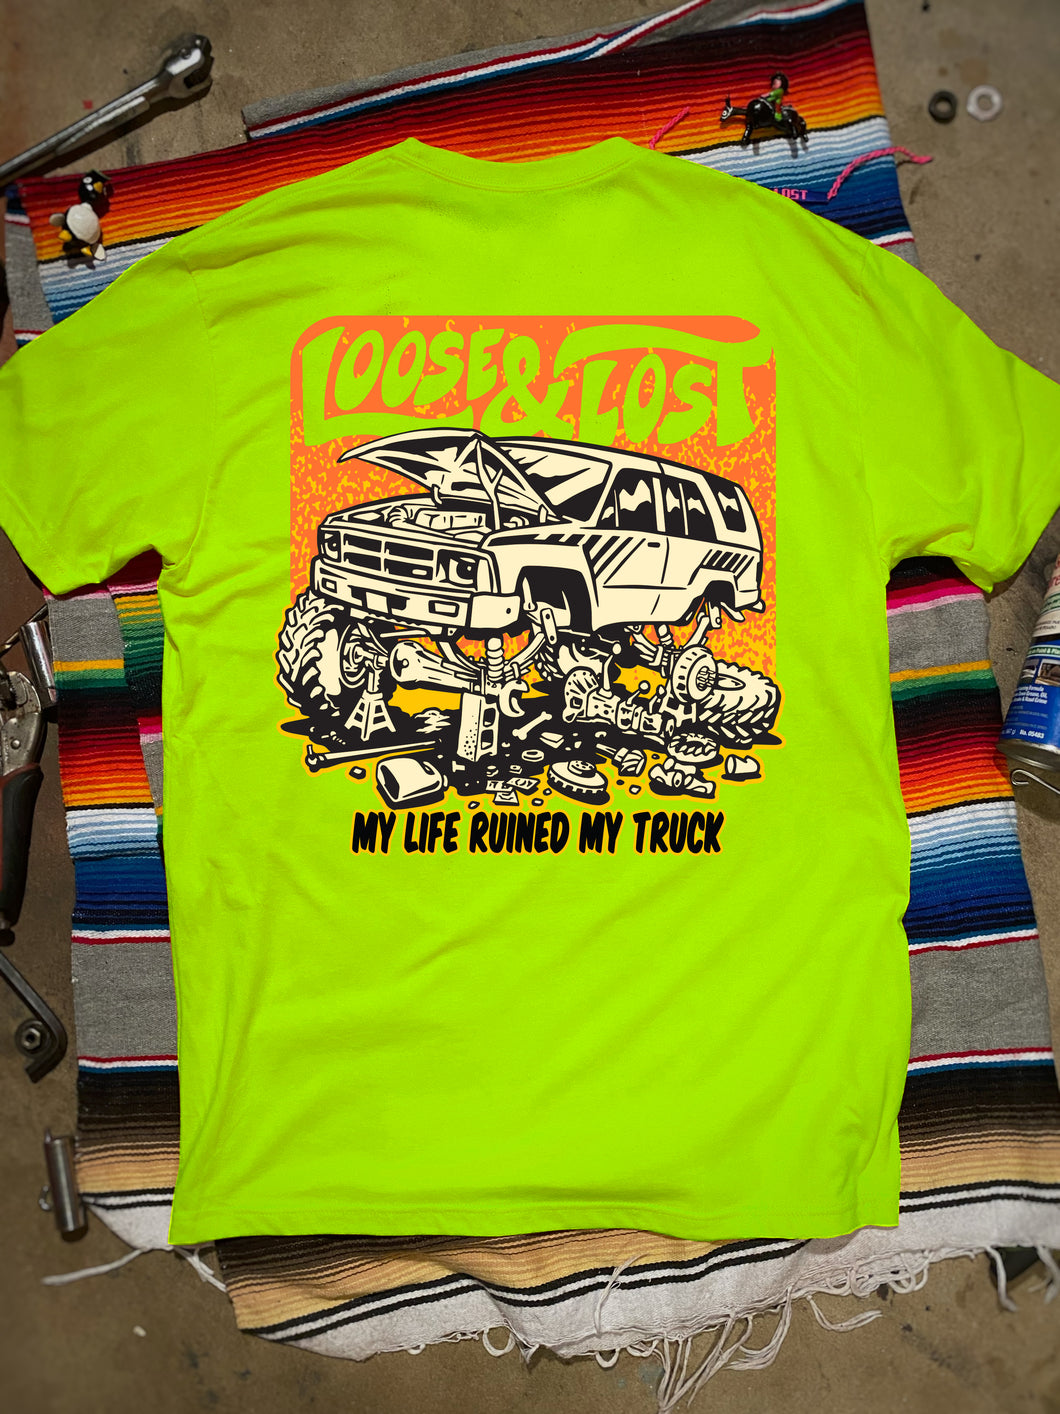 (PRE-ORDER!) My life ruined my truck - Safety Second yellow